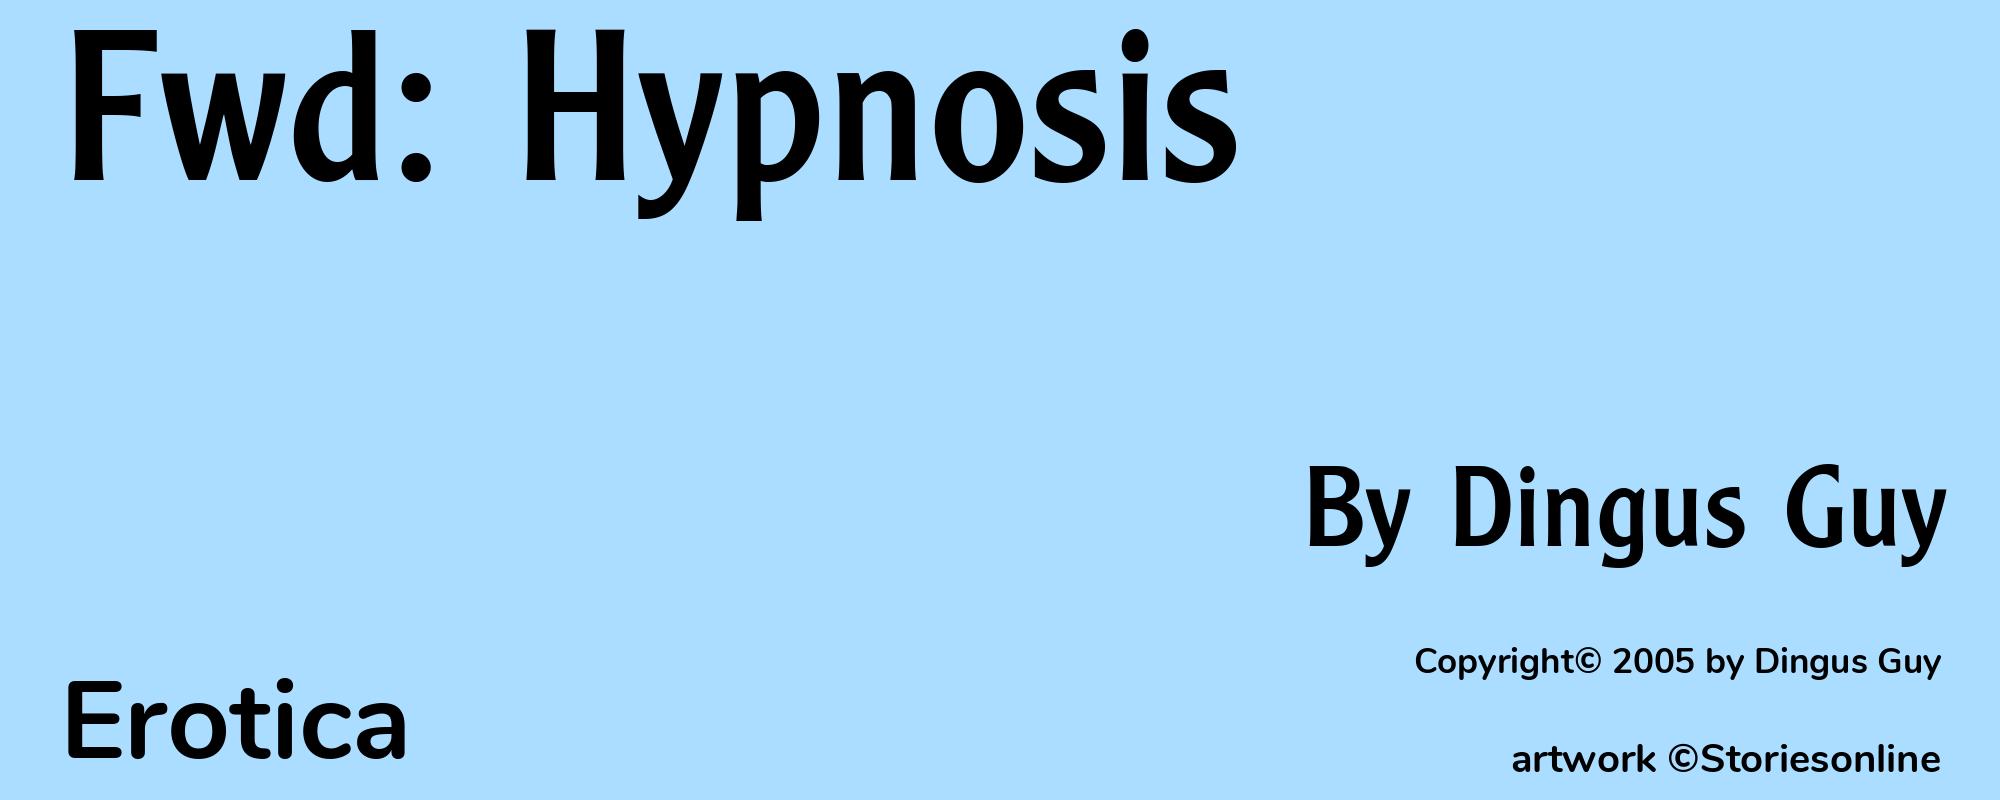 Fwd: Hypnosis - Cover